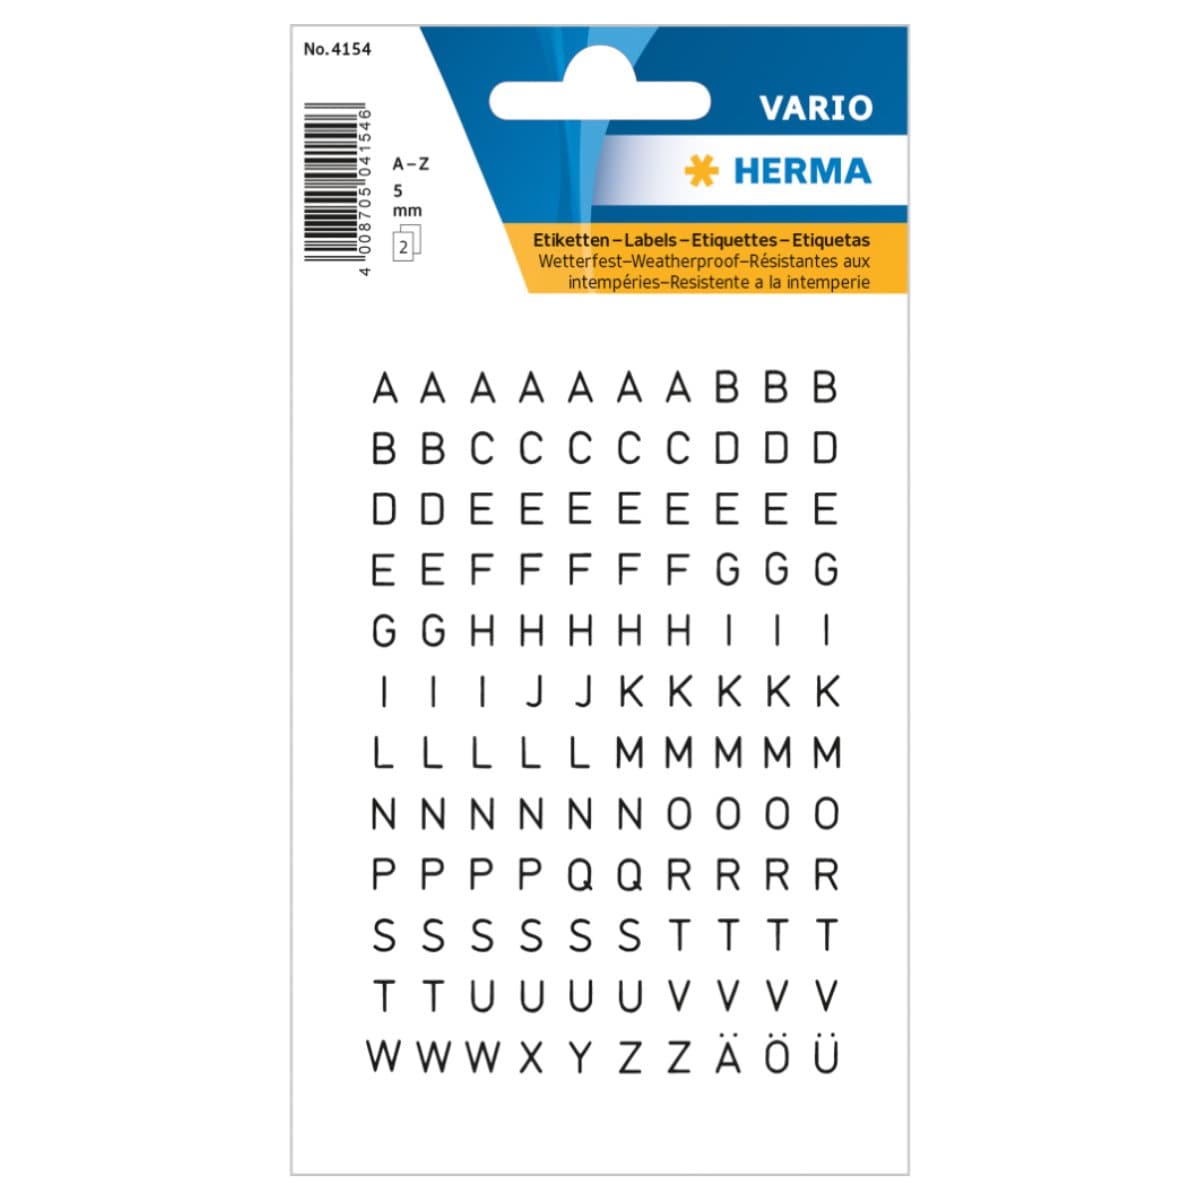 Herma Vario Sticker Letters A-Z, 5mm, weatherproof film, 2sheets/pack, Black on Clear